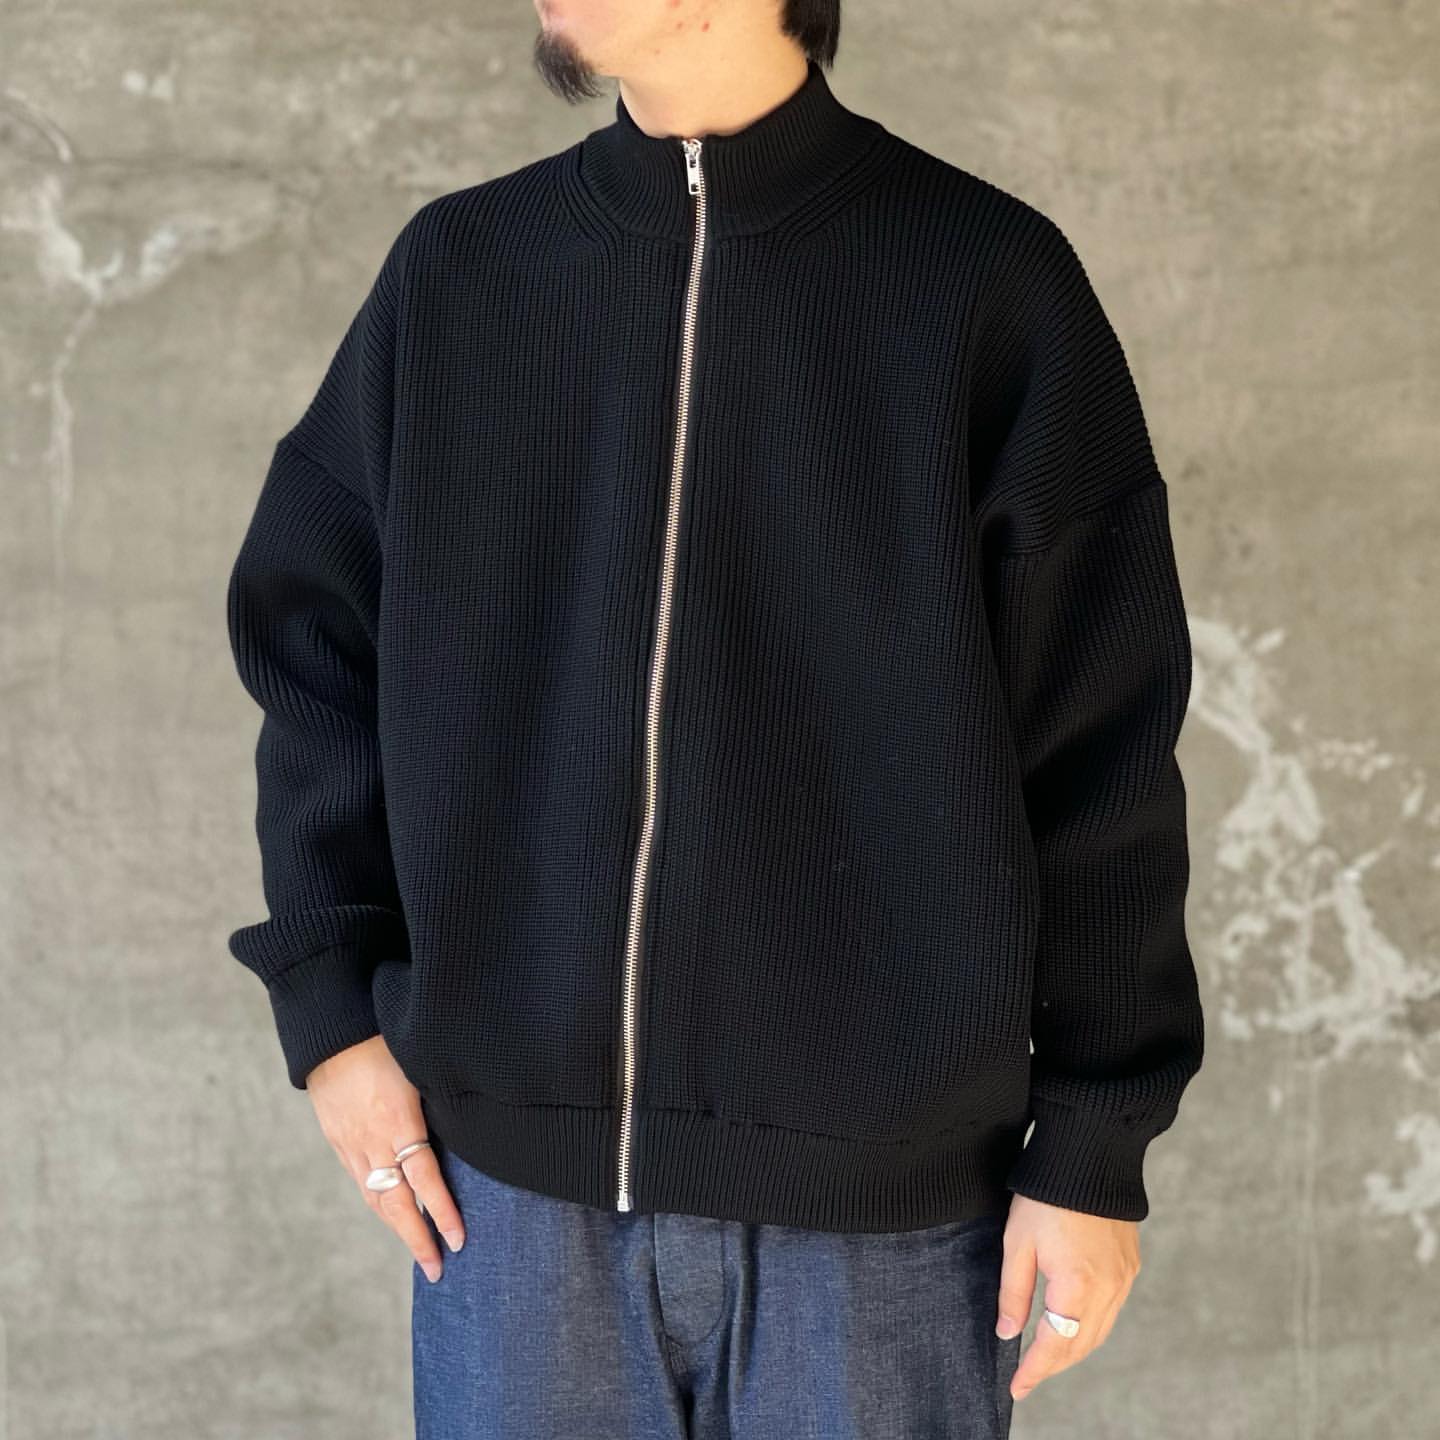 COOTIE PRODUCTIONS®/Rib Stitch Drivers Sweater | Official mail